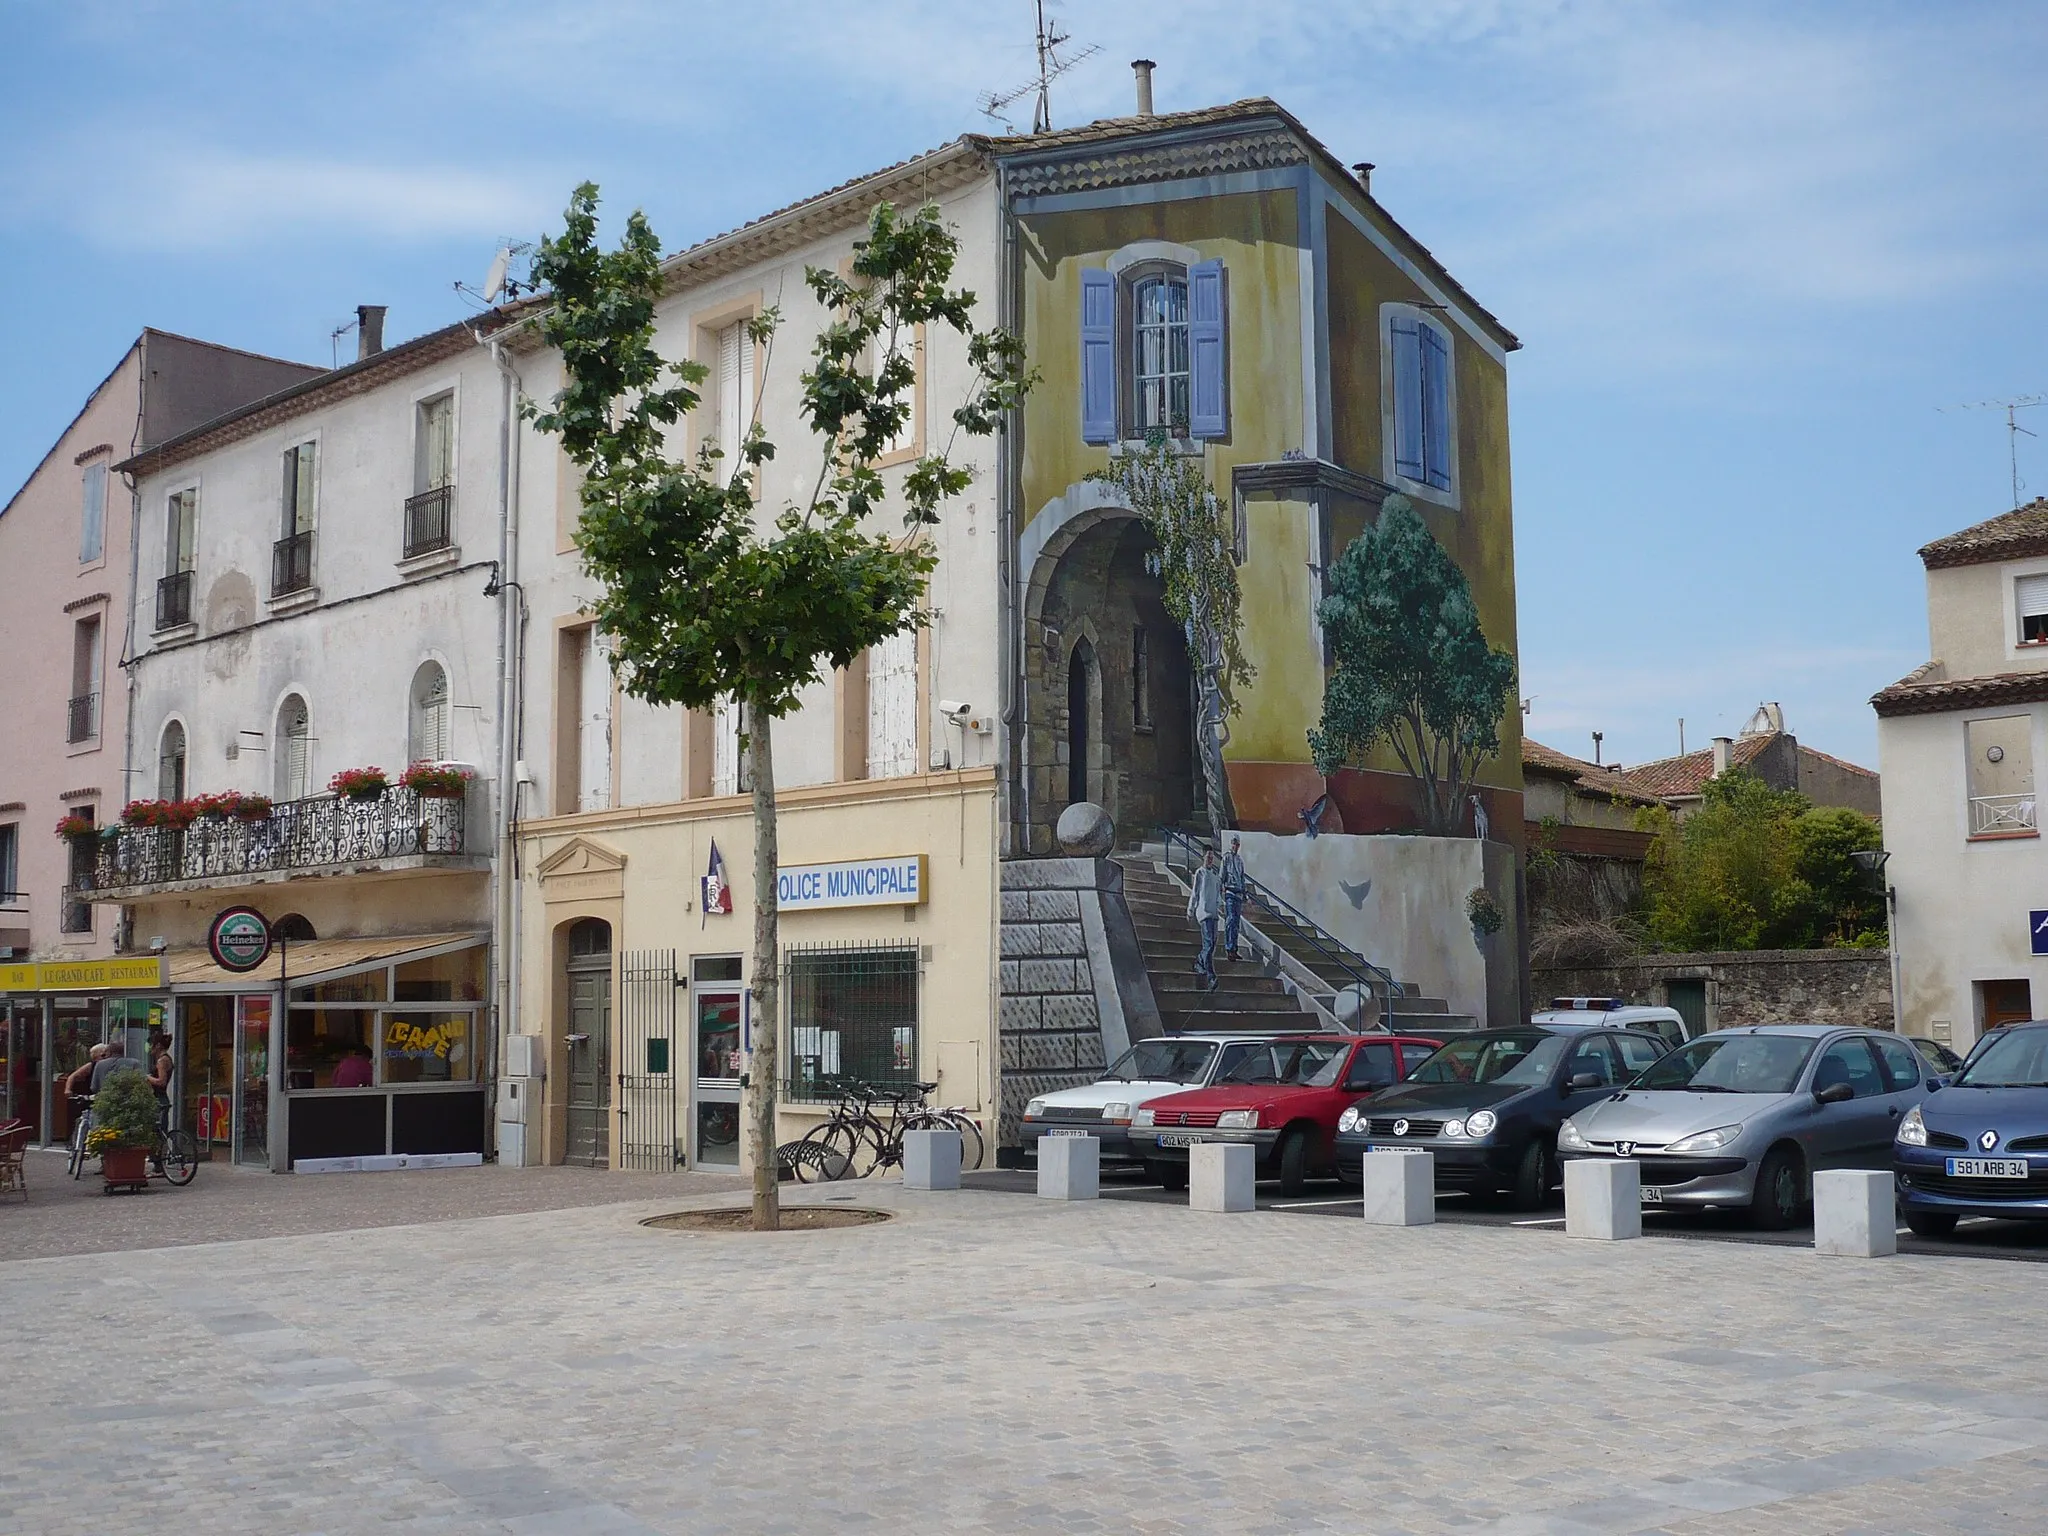 Photo showing: The main square in Villeneuve-le-beziers with distinct artwork